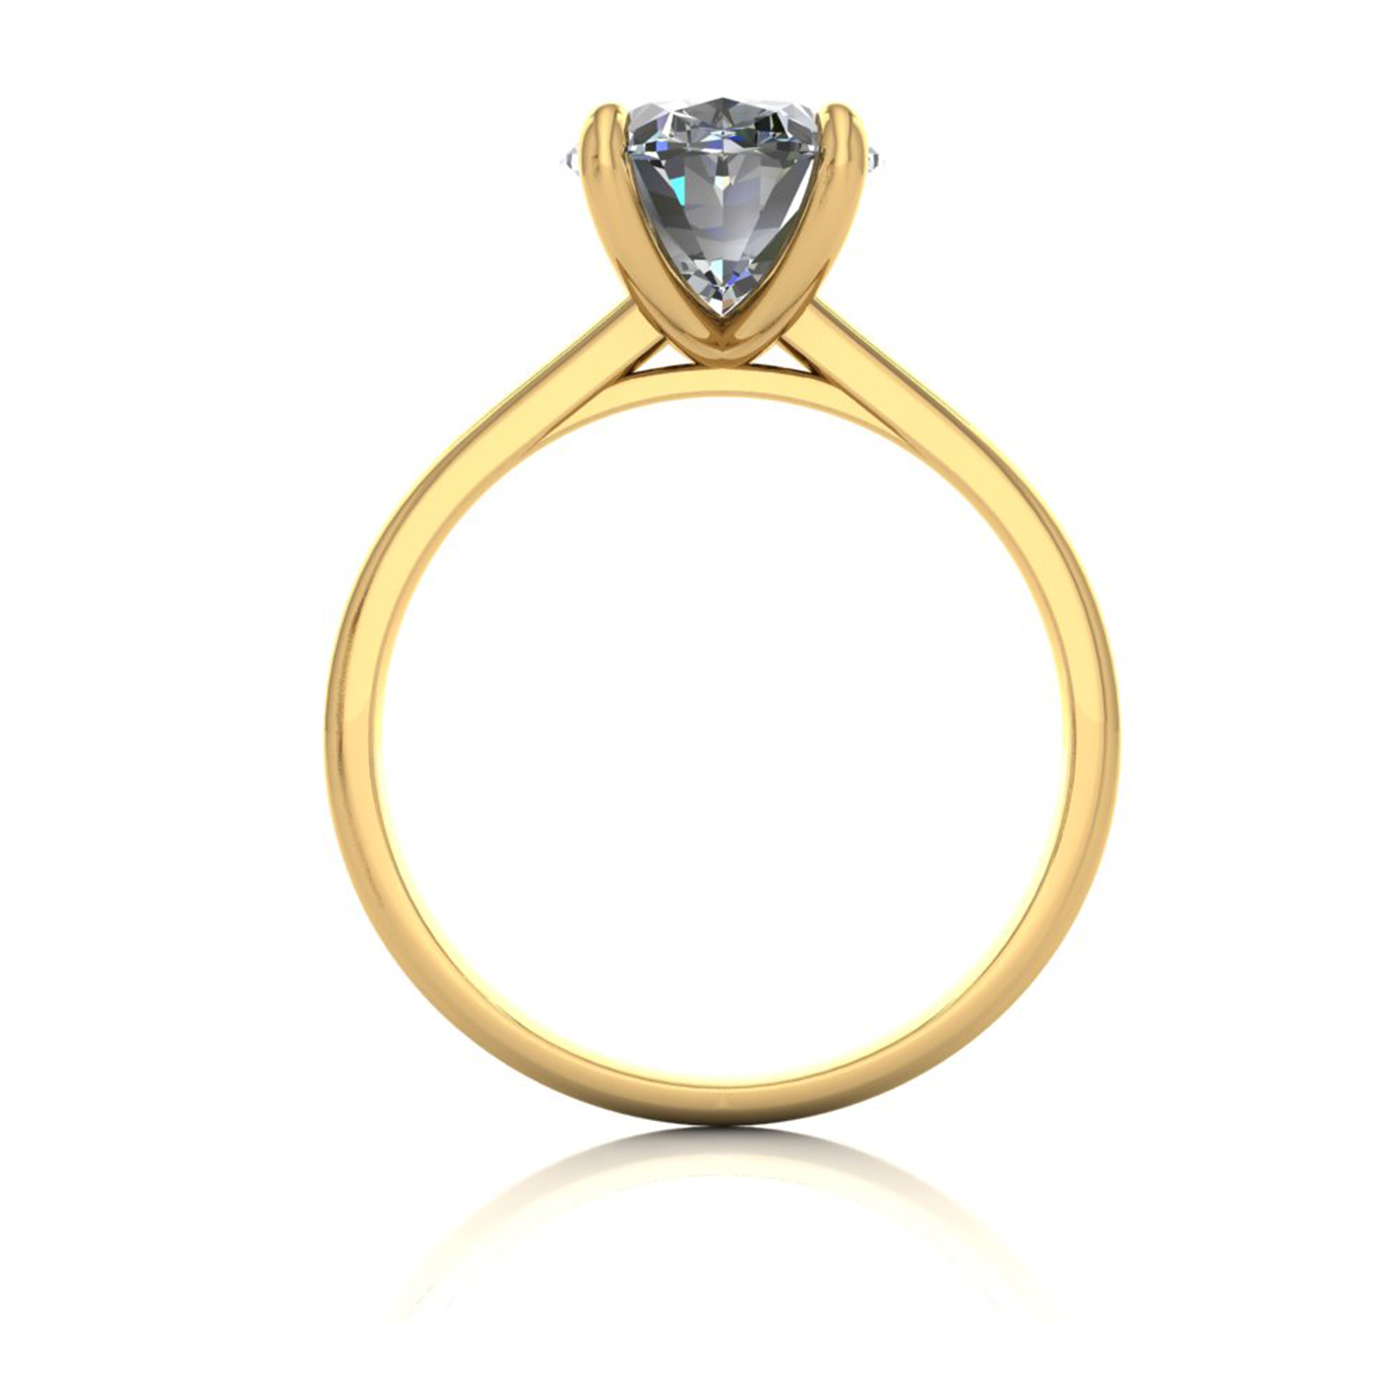 18k yellow gold  2,50 ct 4 prongs solitaire oval cut diamond engagement ring with whisper thin band